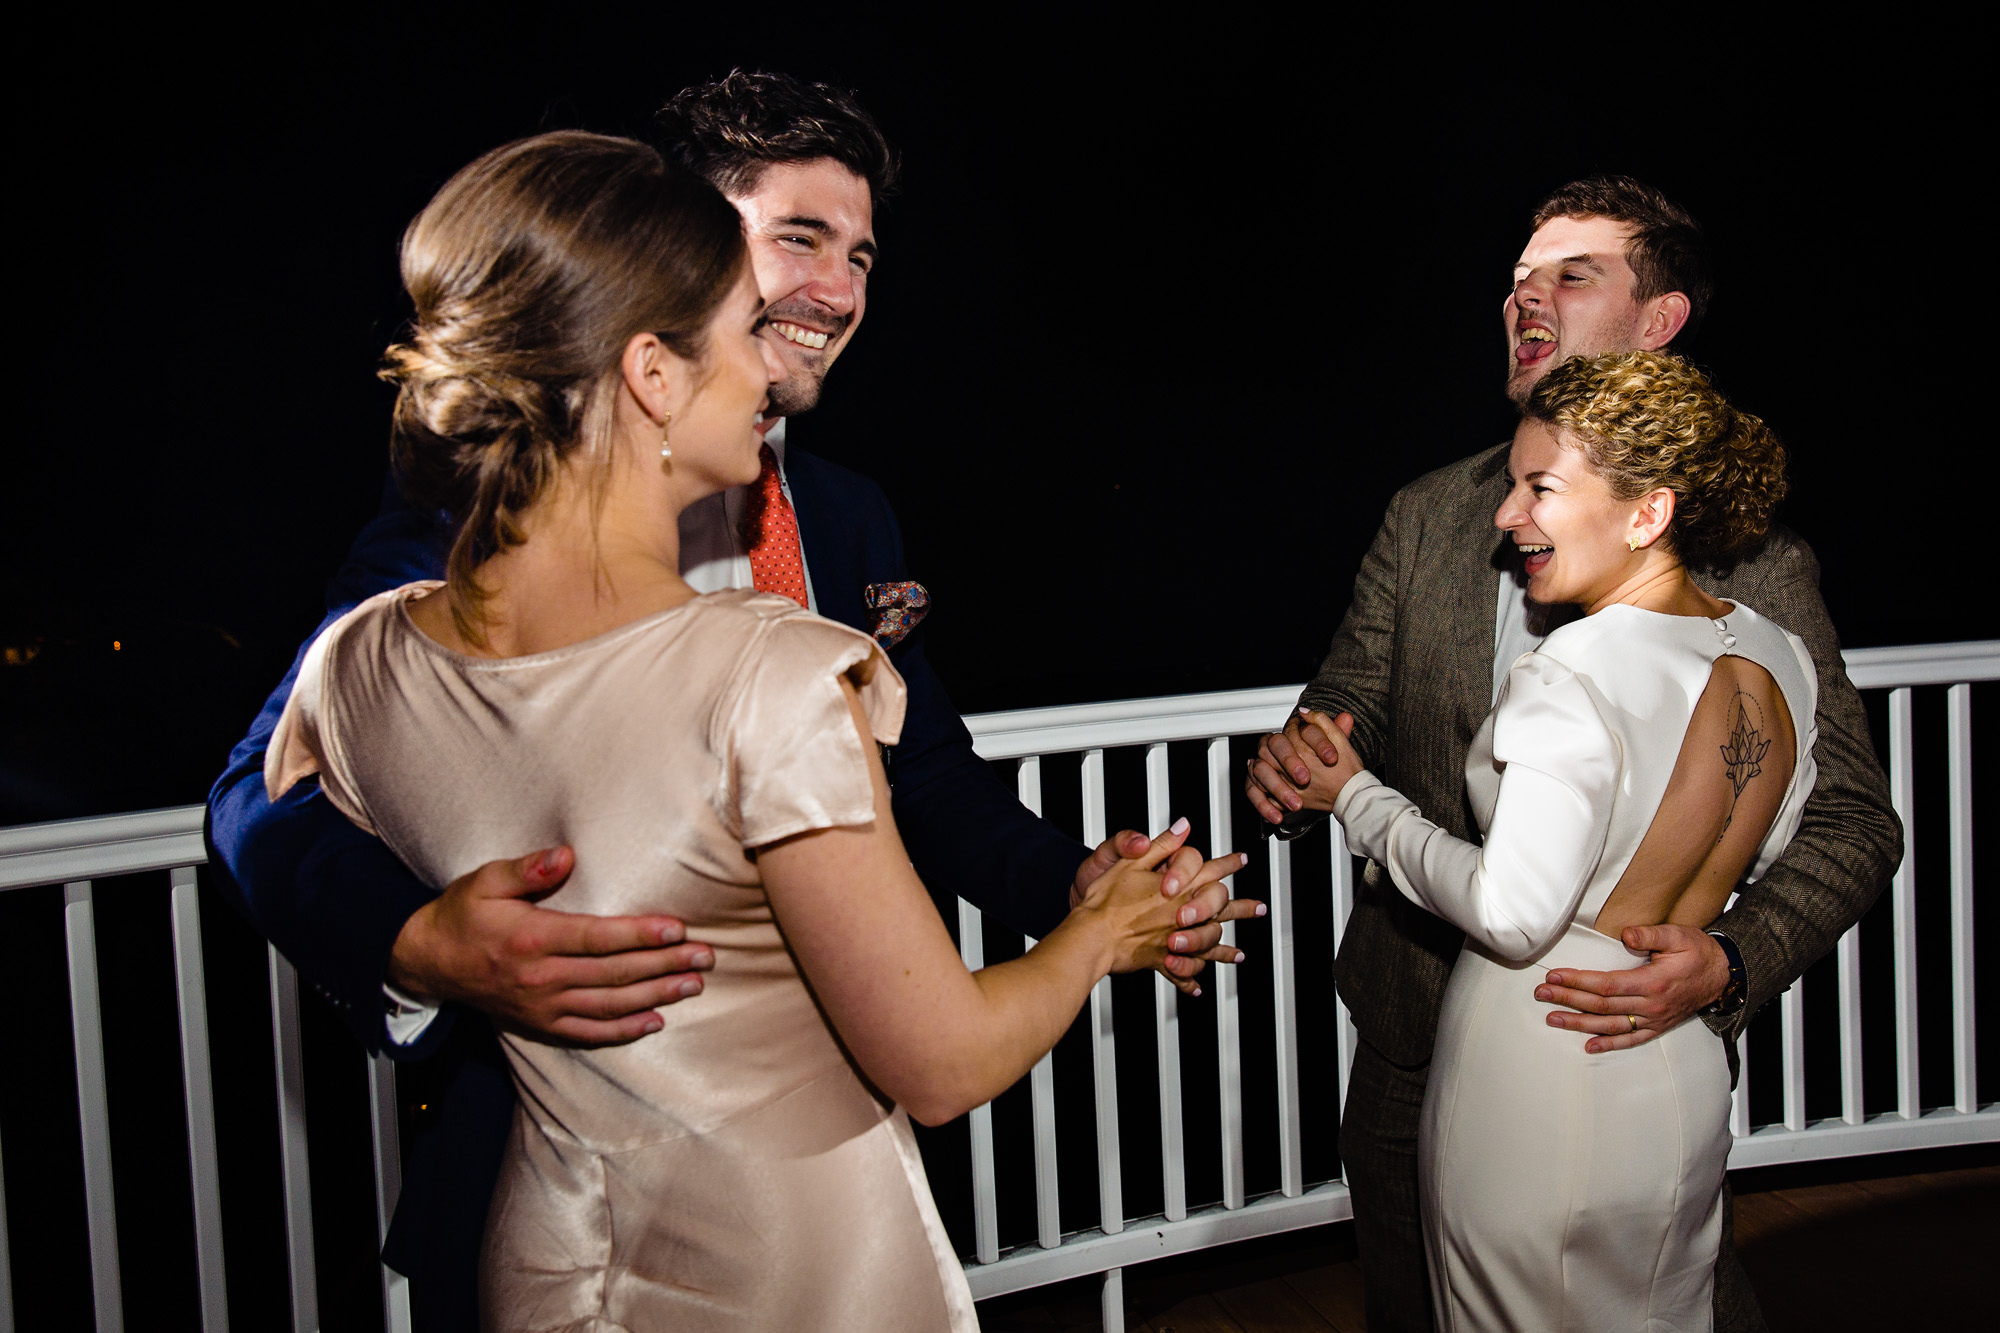 The bride, groom, and their guests dance on the Bar Harbor Inn's porch as night falls